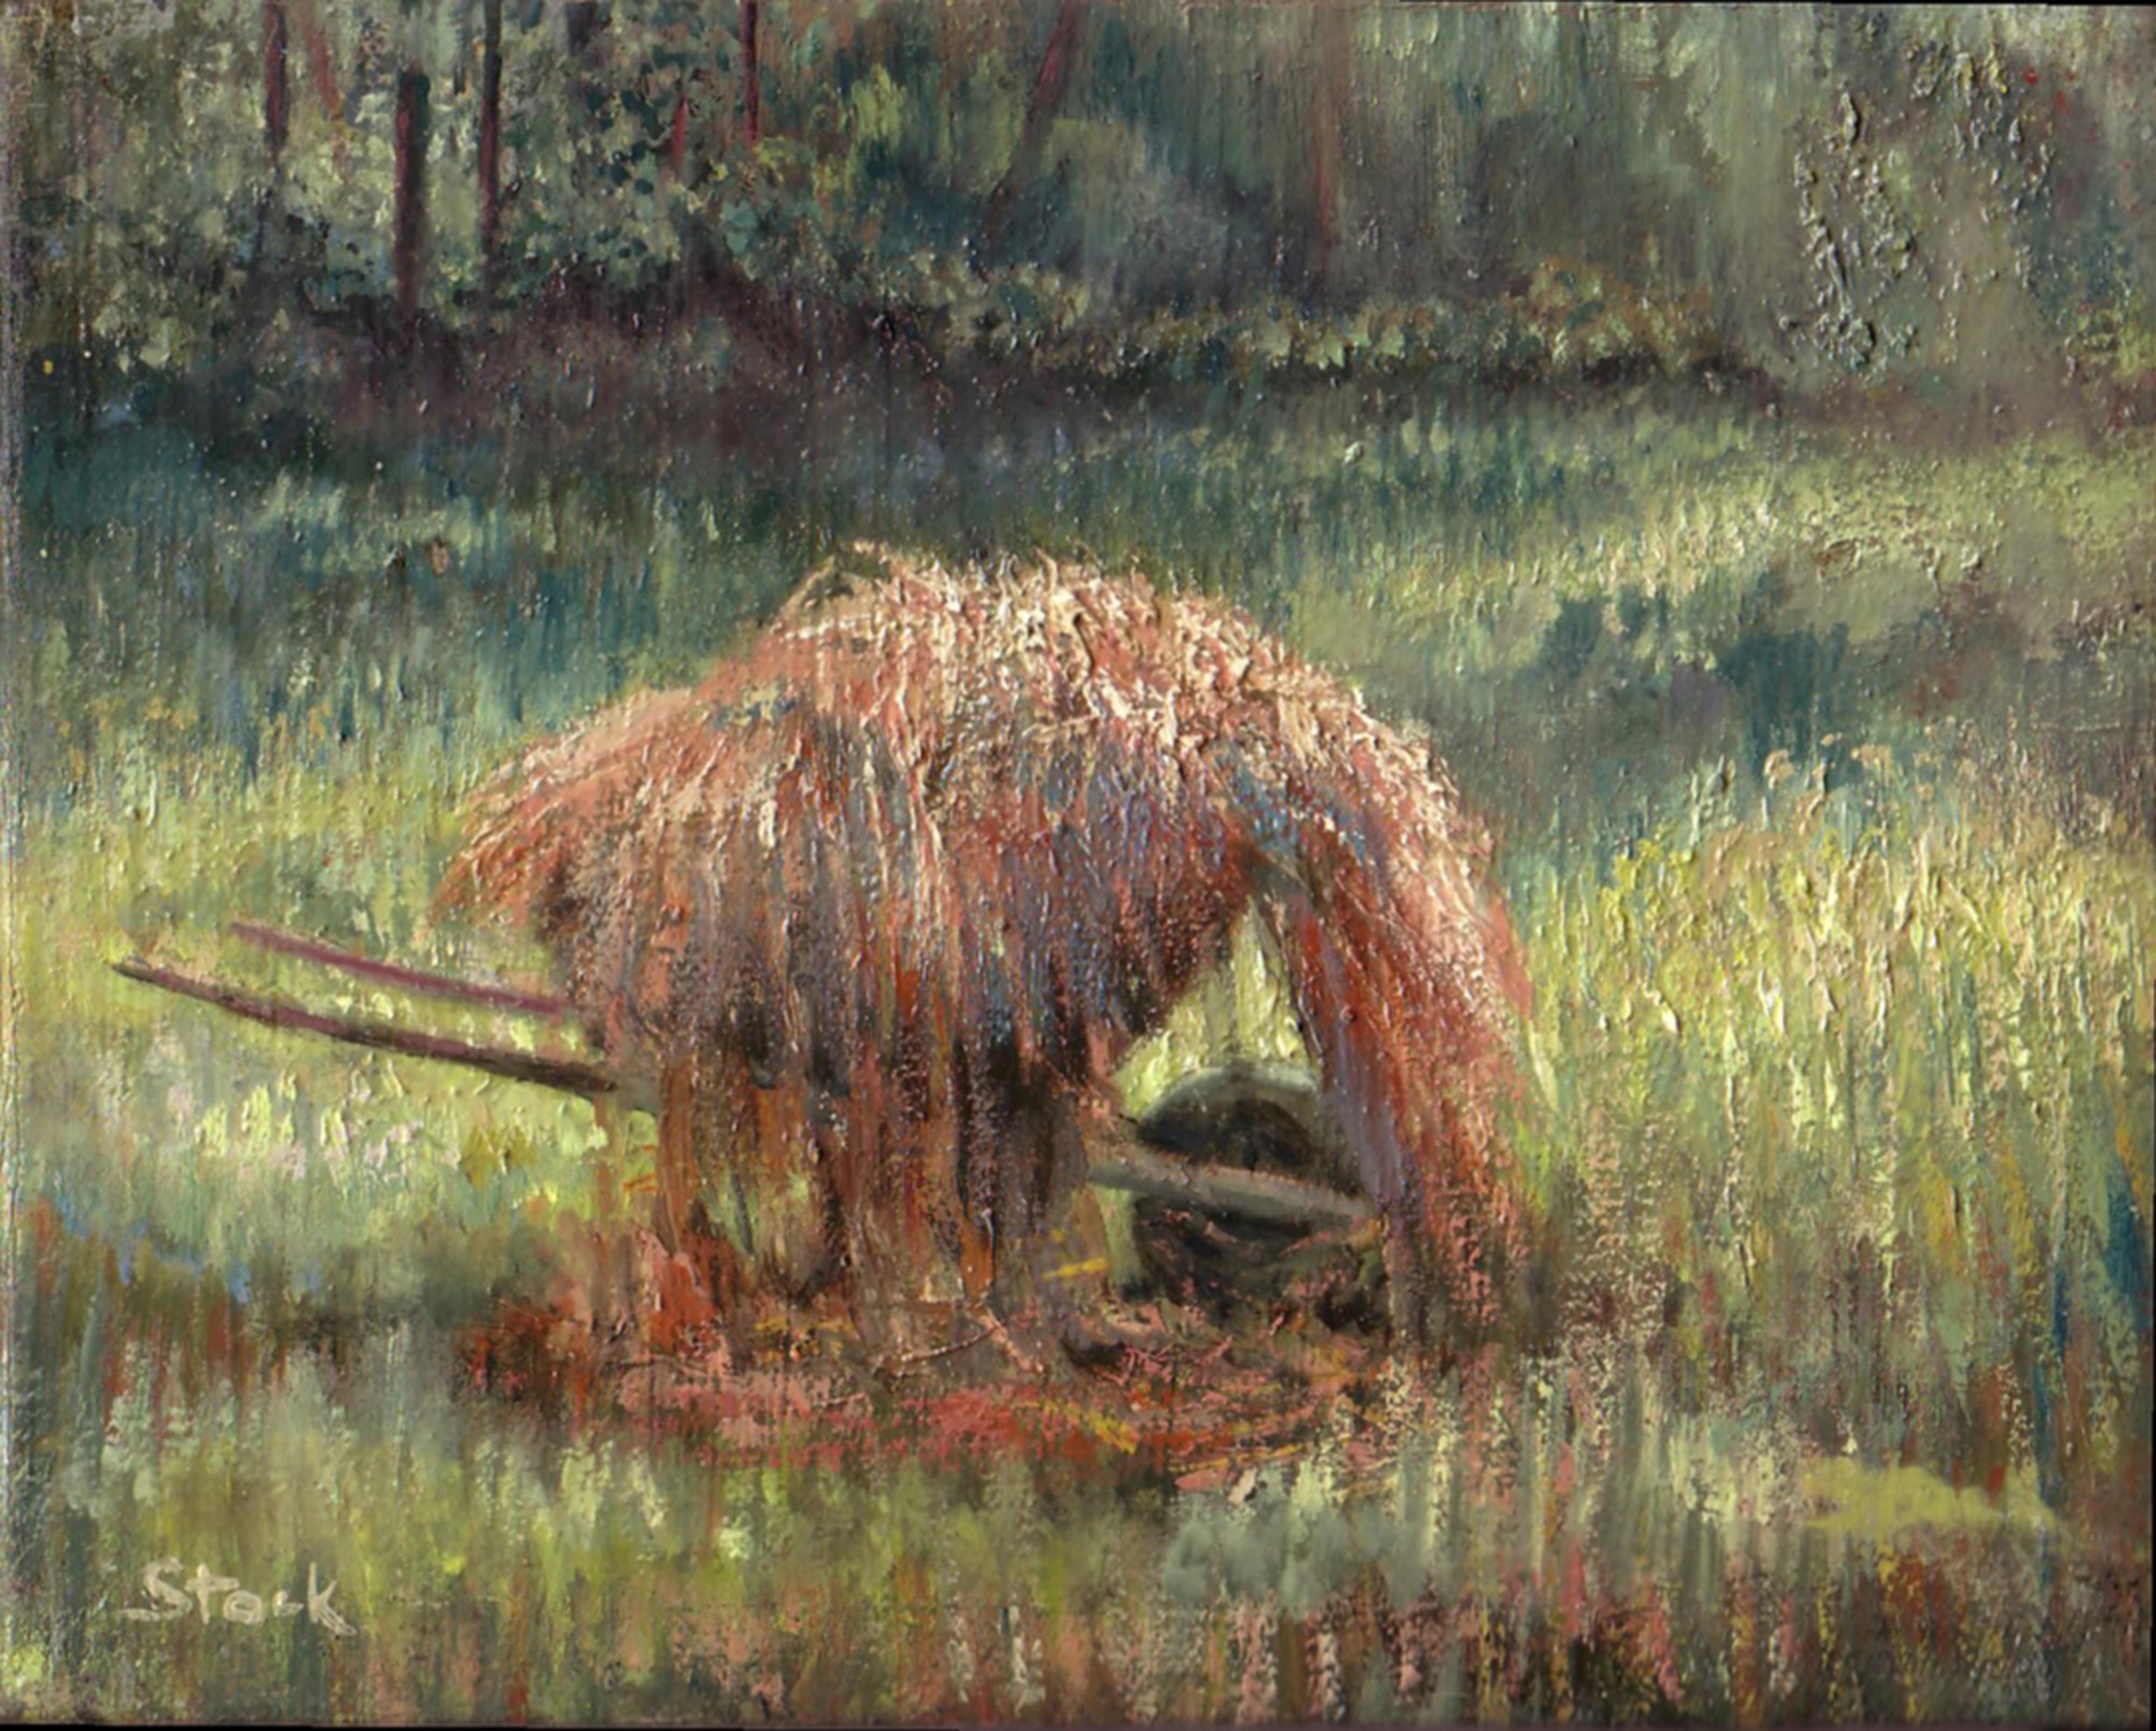 Wheel, oil on canvas by Frank Stock